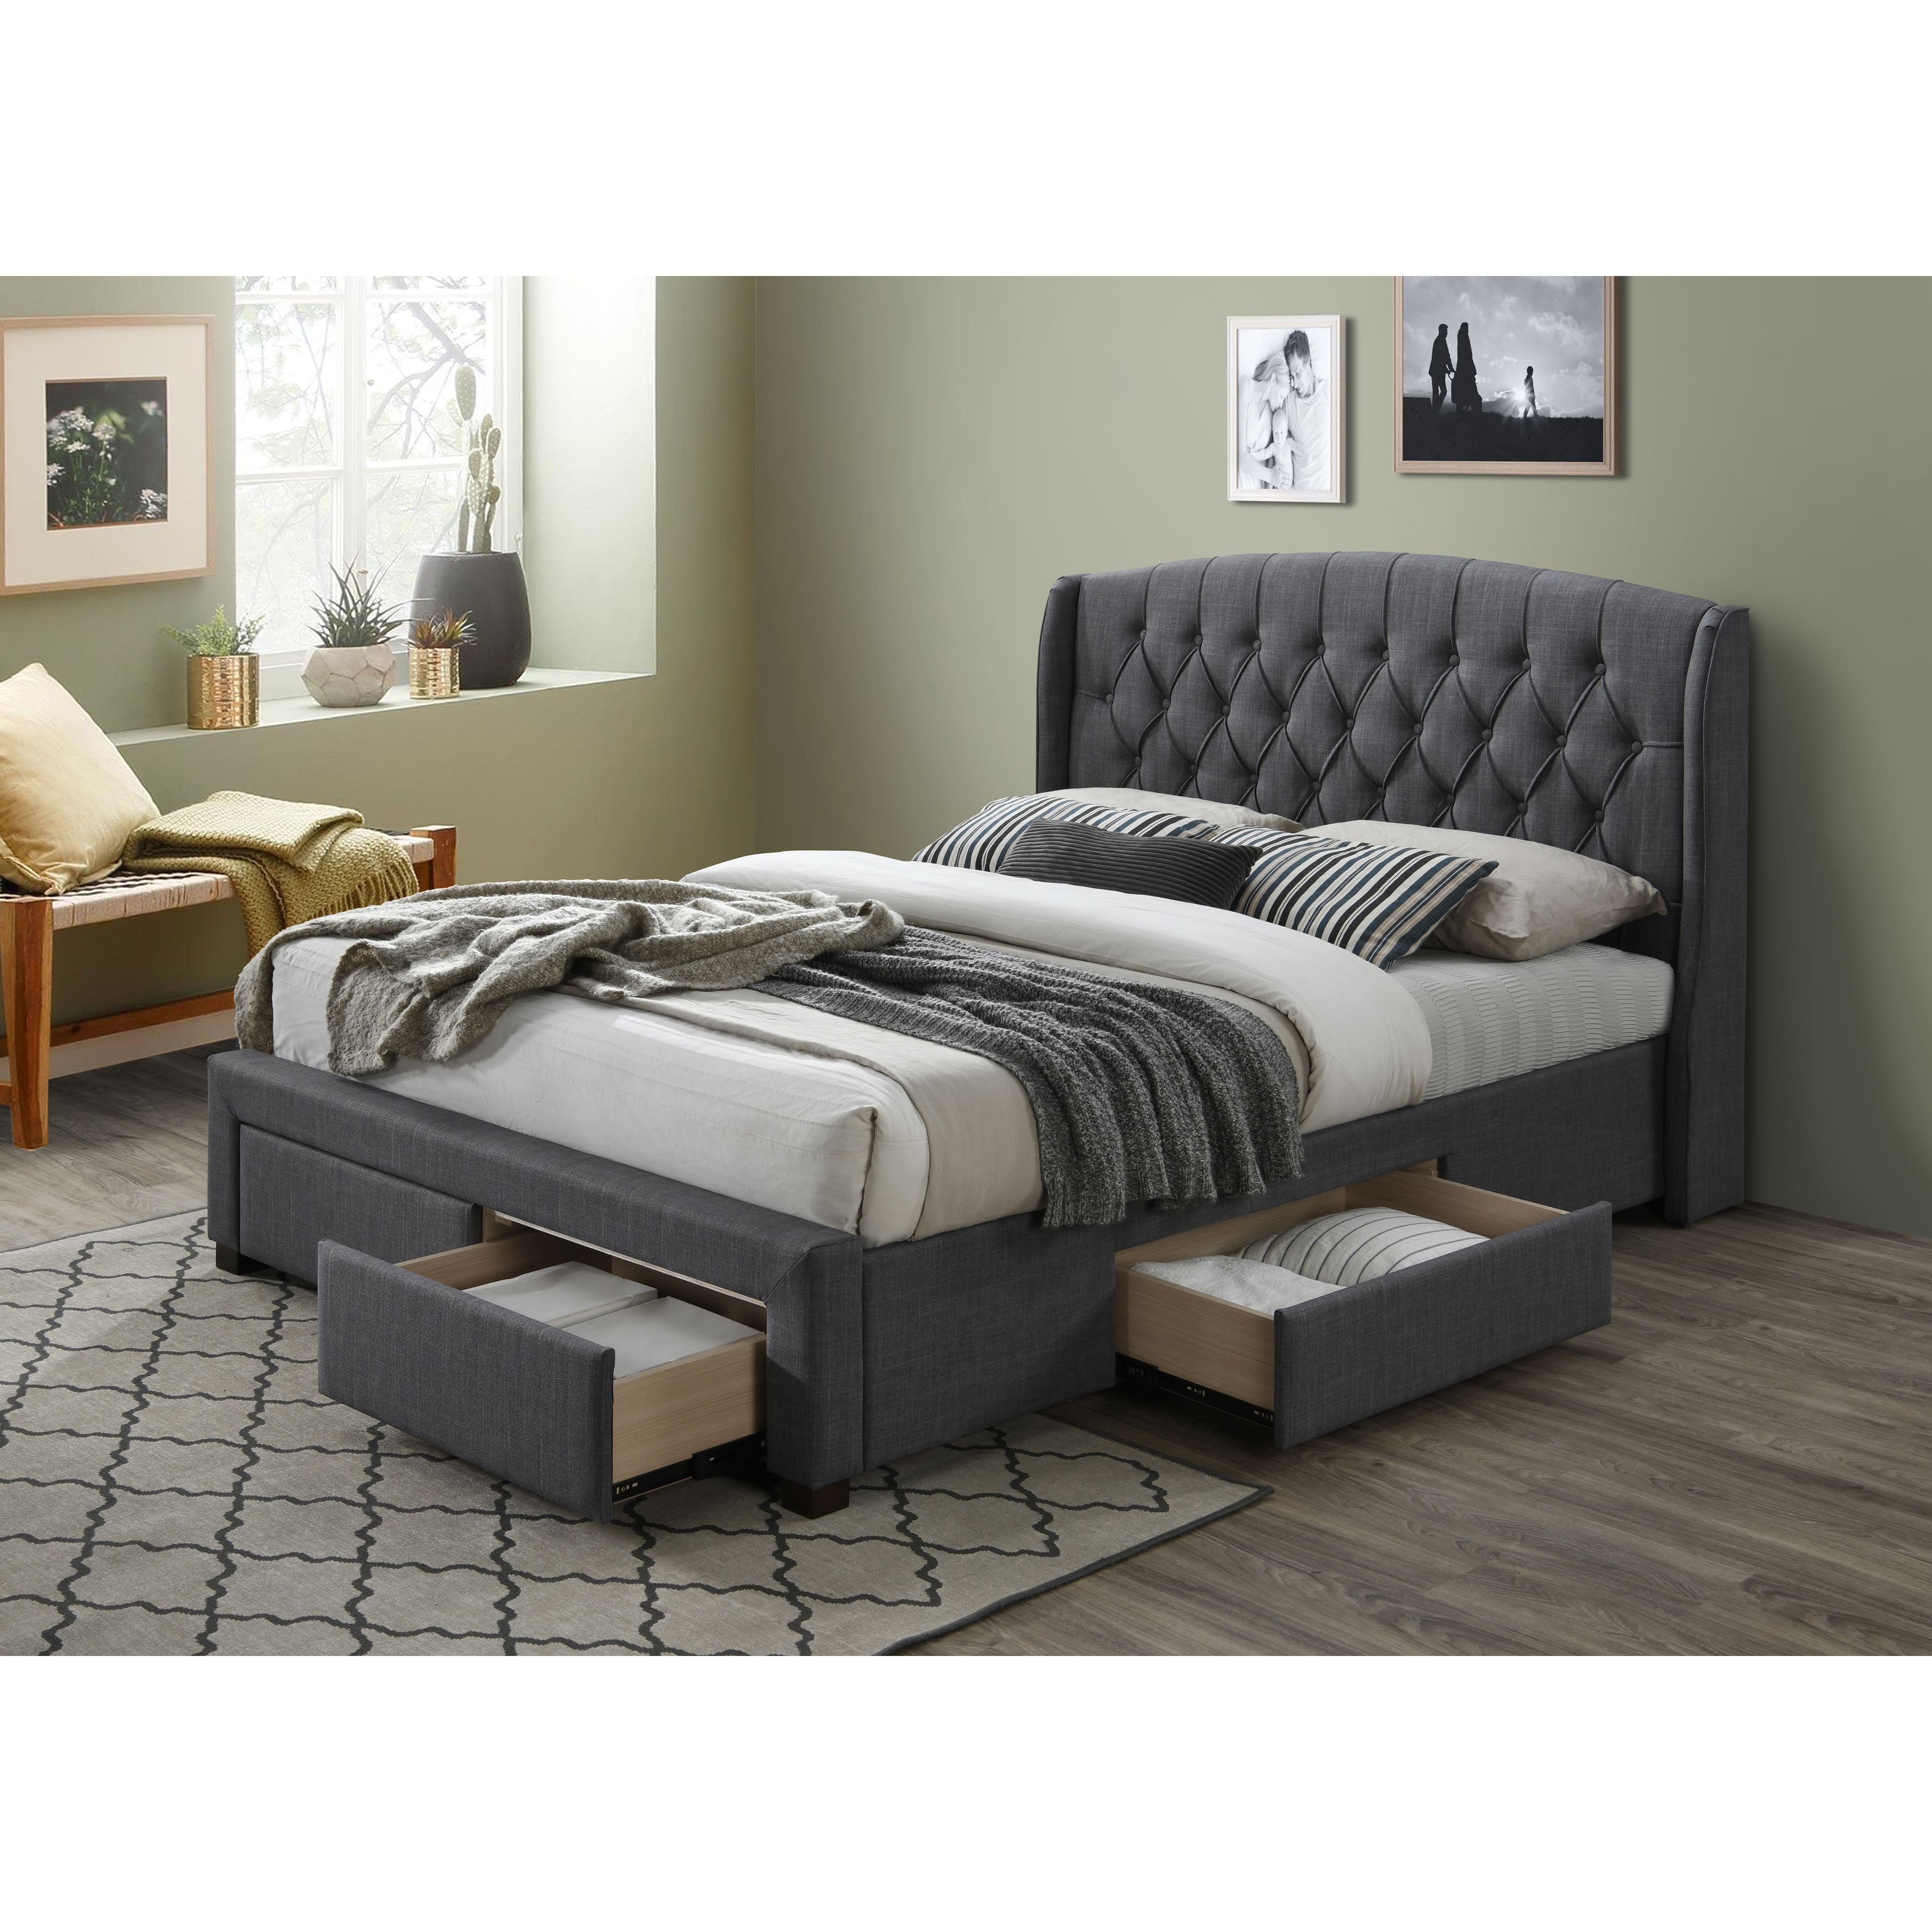 Honeydew Double Size Bed Frame Timber Mattress Base With Storage Drawers - Grey - SILBERSHELL